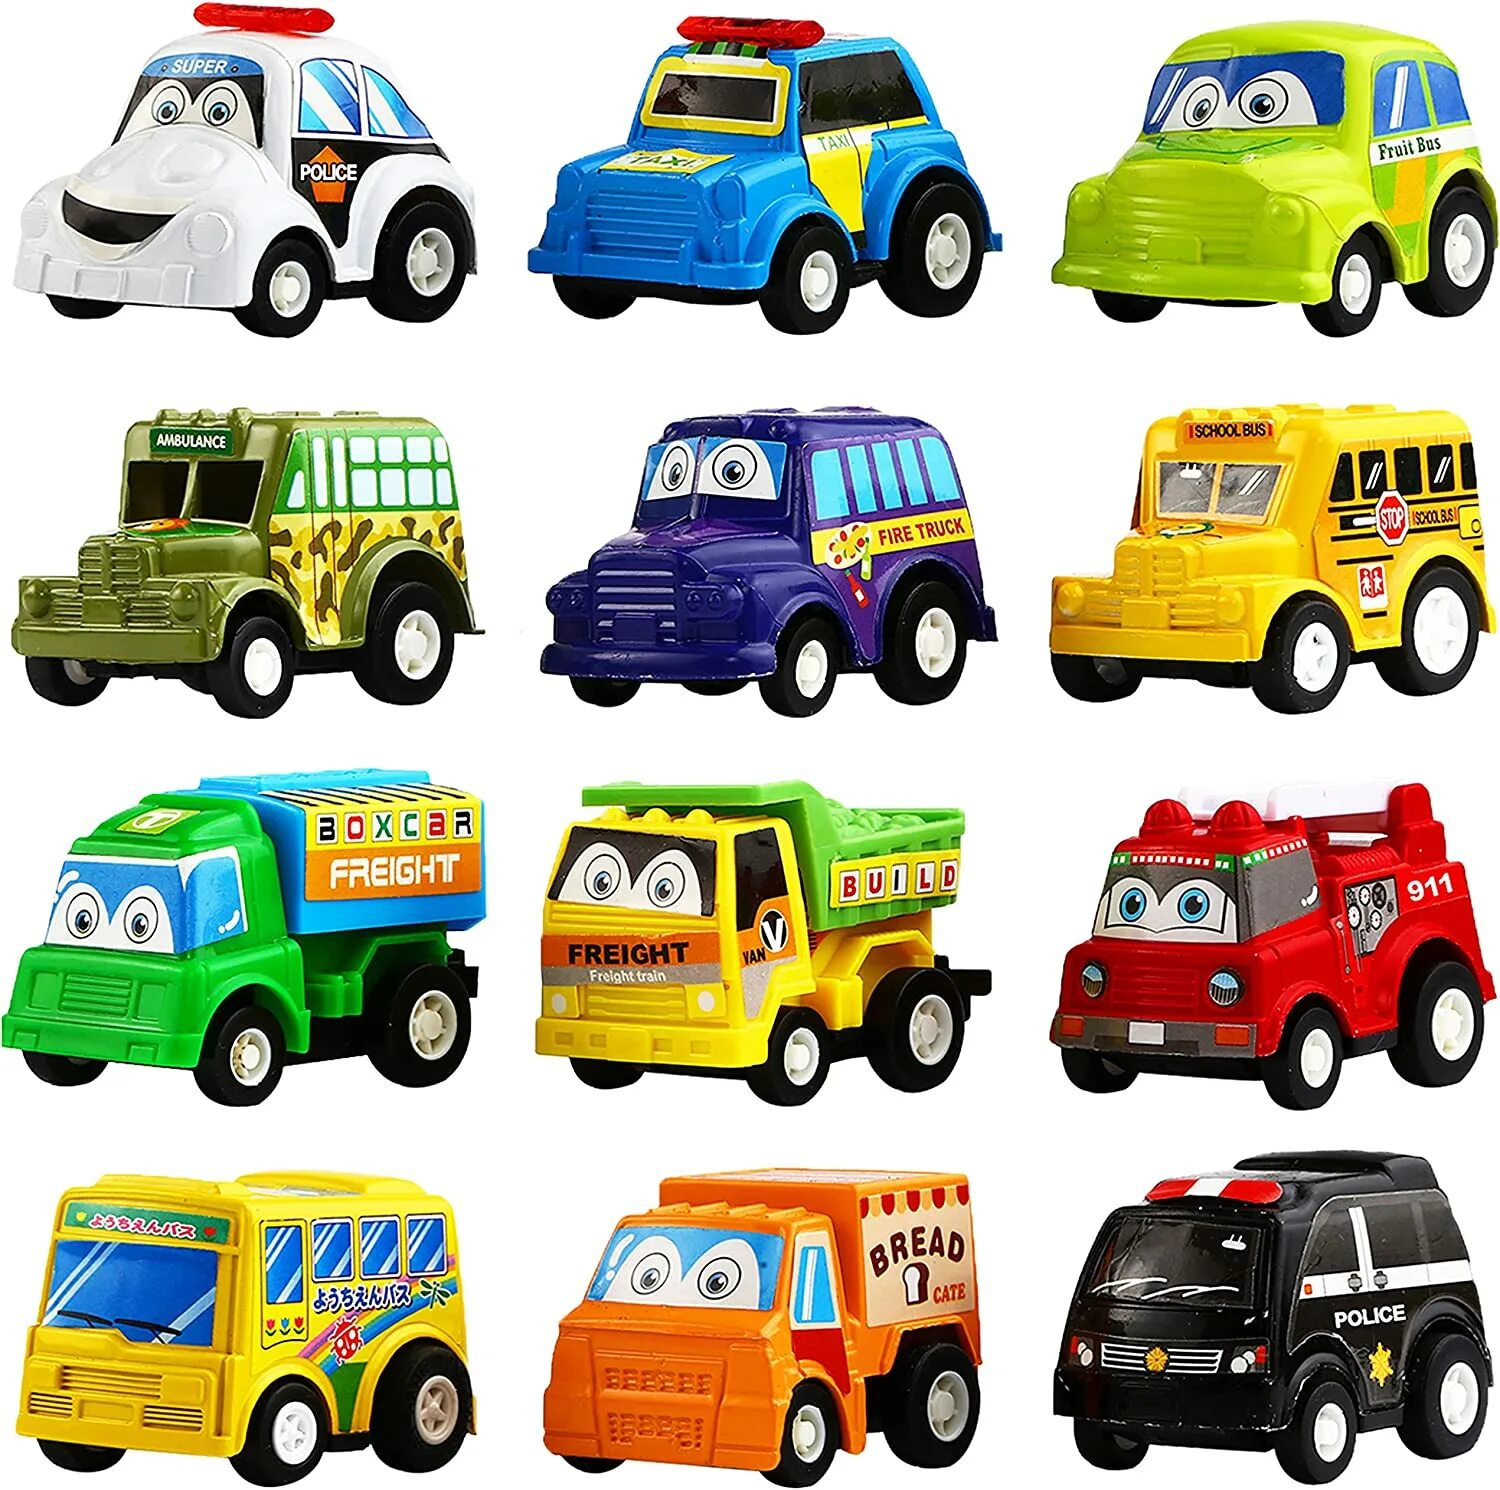 Truck toy cars. Игрушки Pull back cars. Minicar игрушки. Toy car Colour. Pull and игрушка машина.